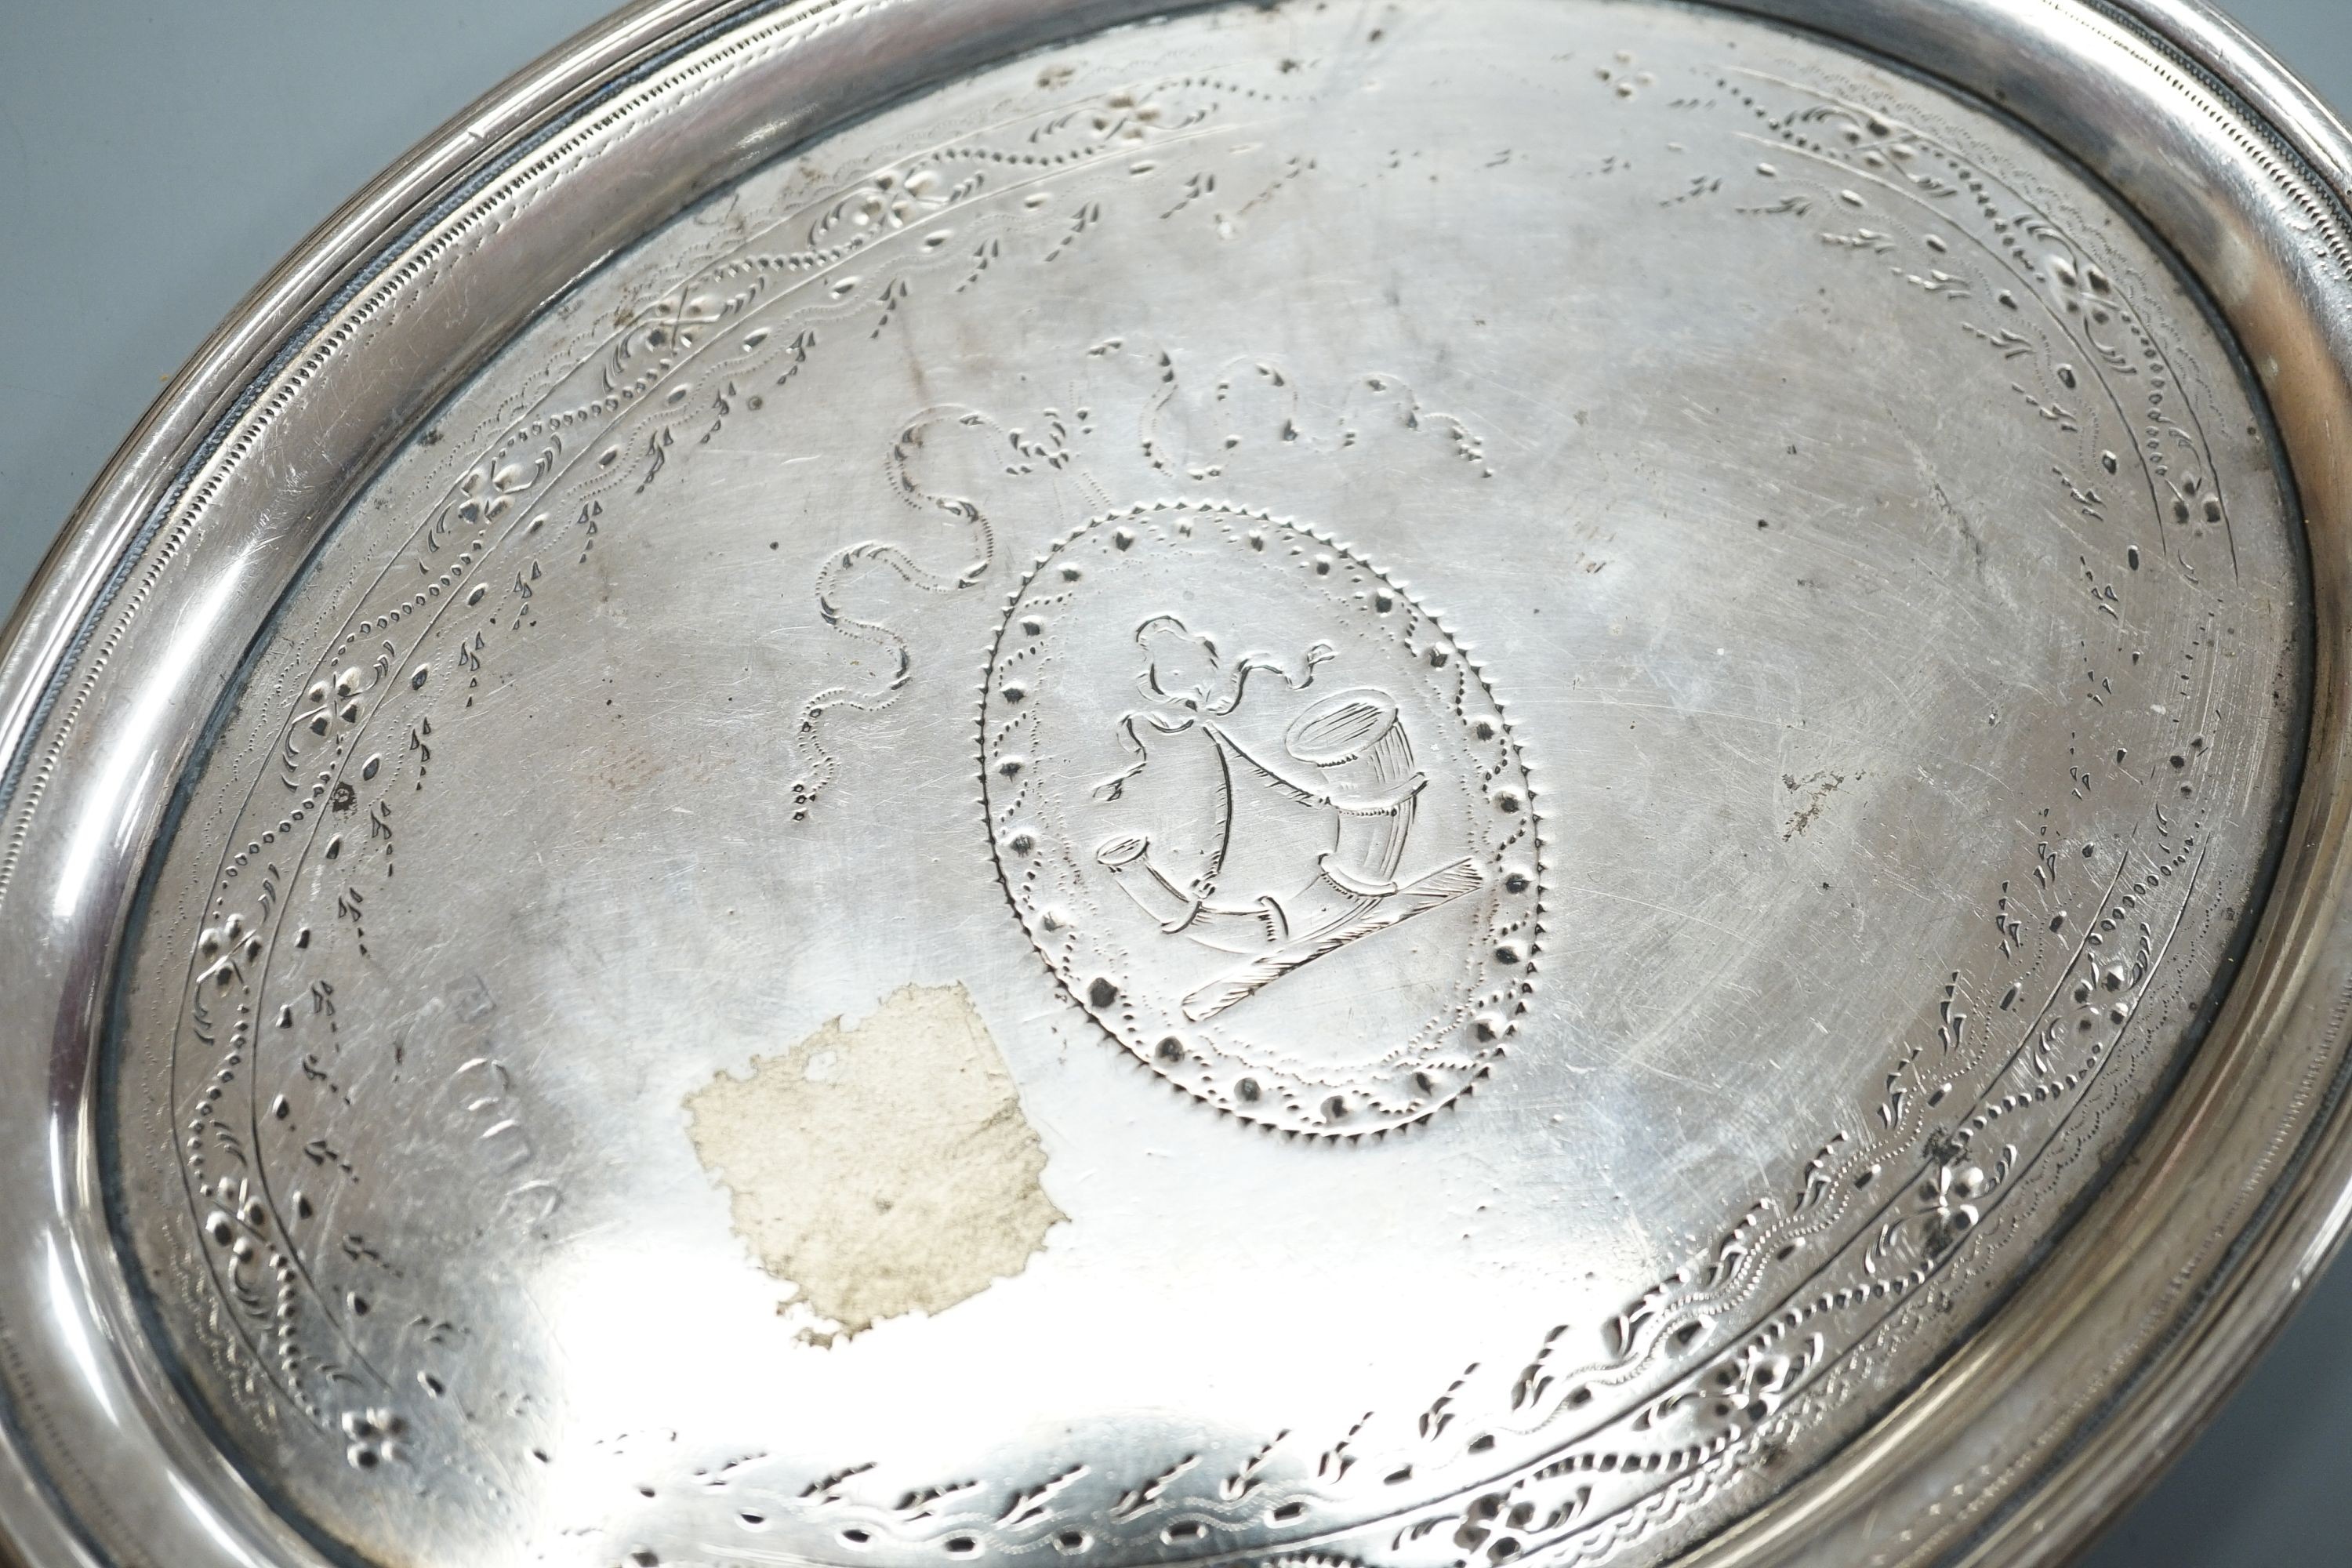 A George III silver oval teapot stand, with tired engraved decoration and wooden base, London, 1790, marks quite rubbed, 16.9cm.